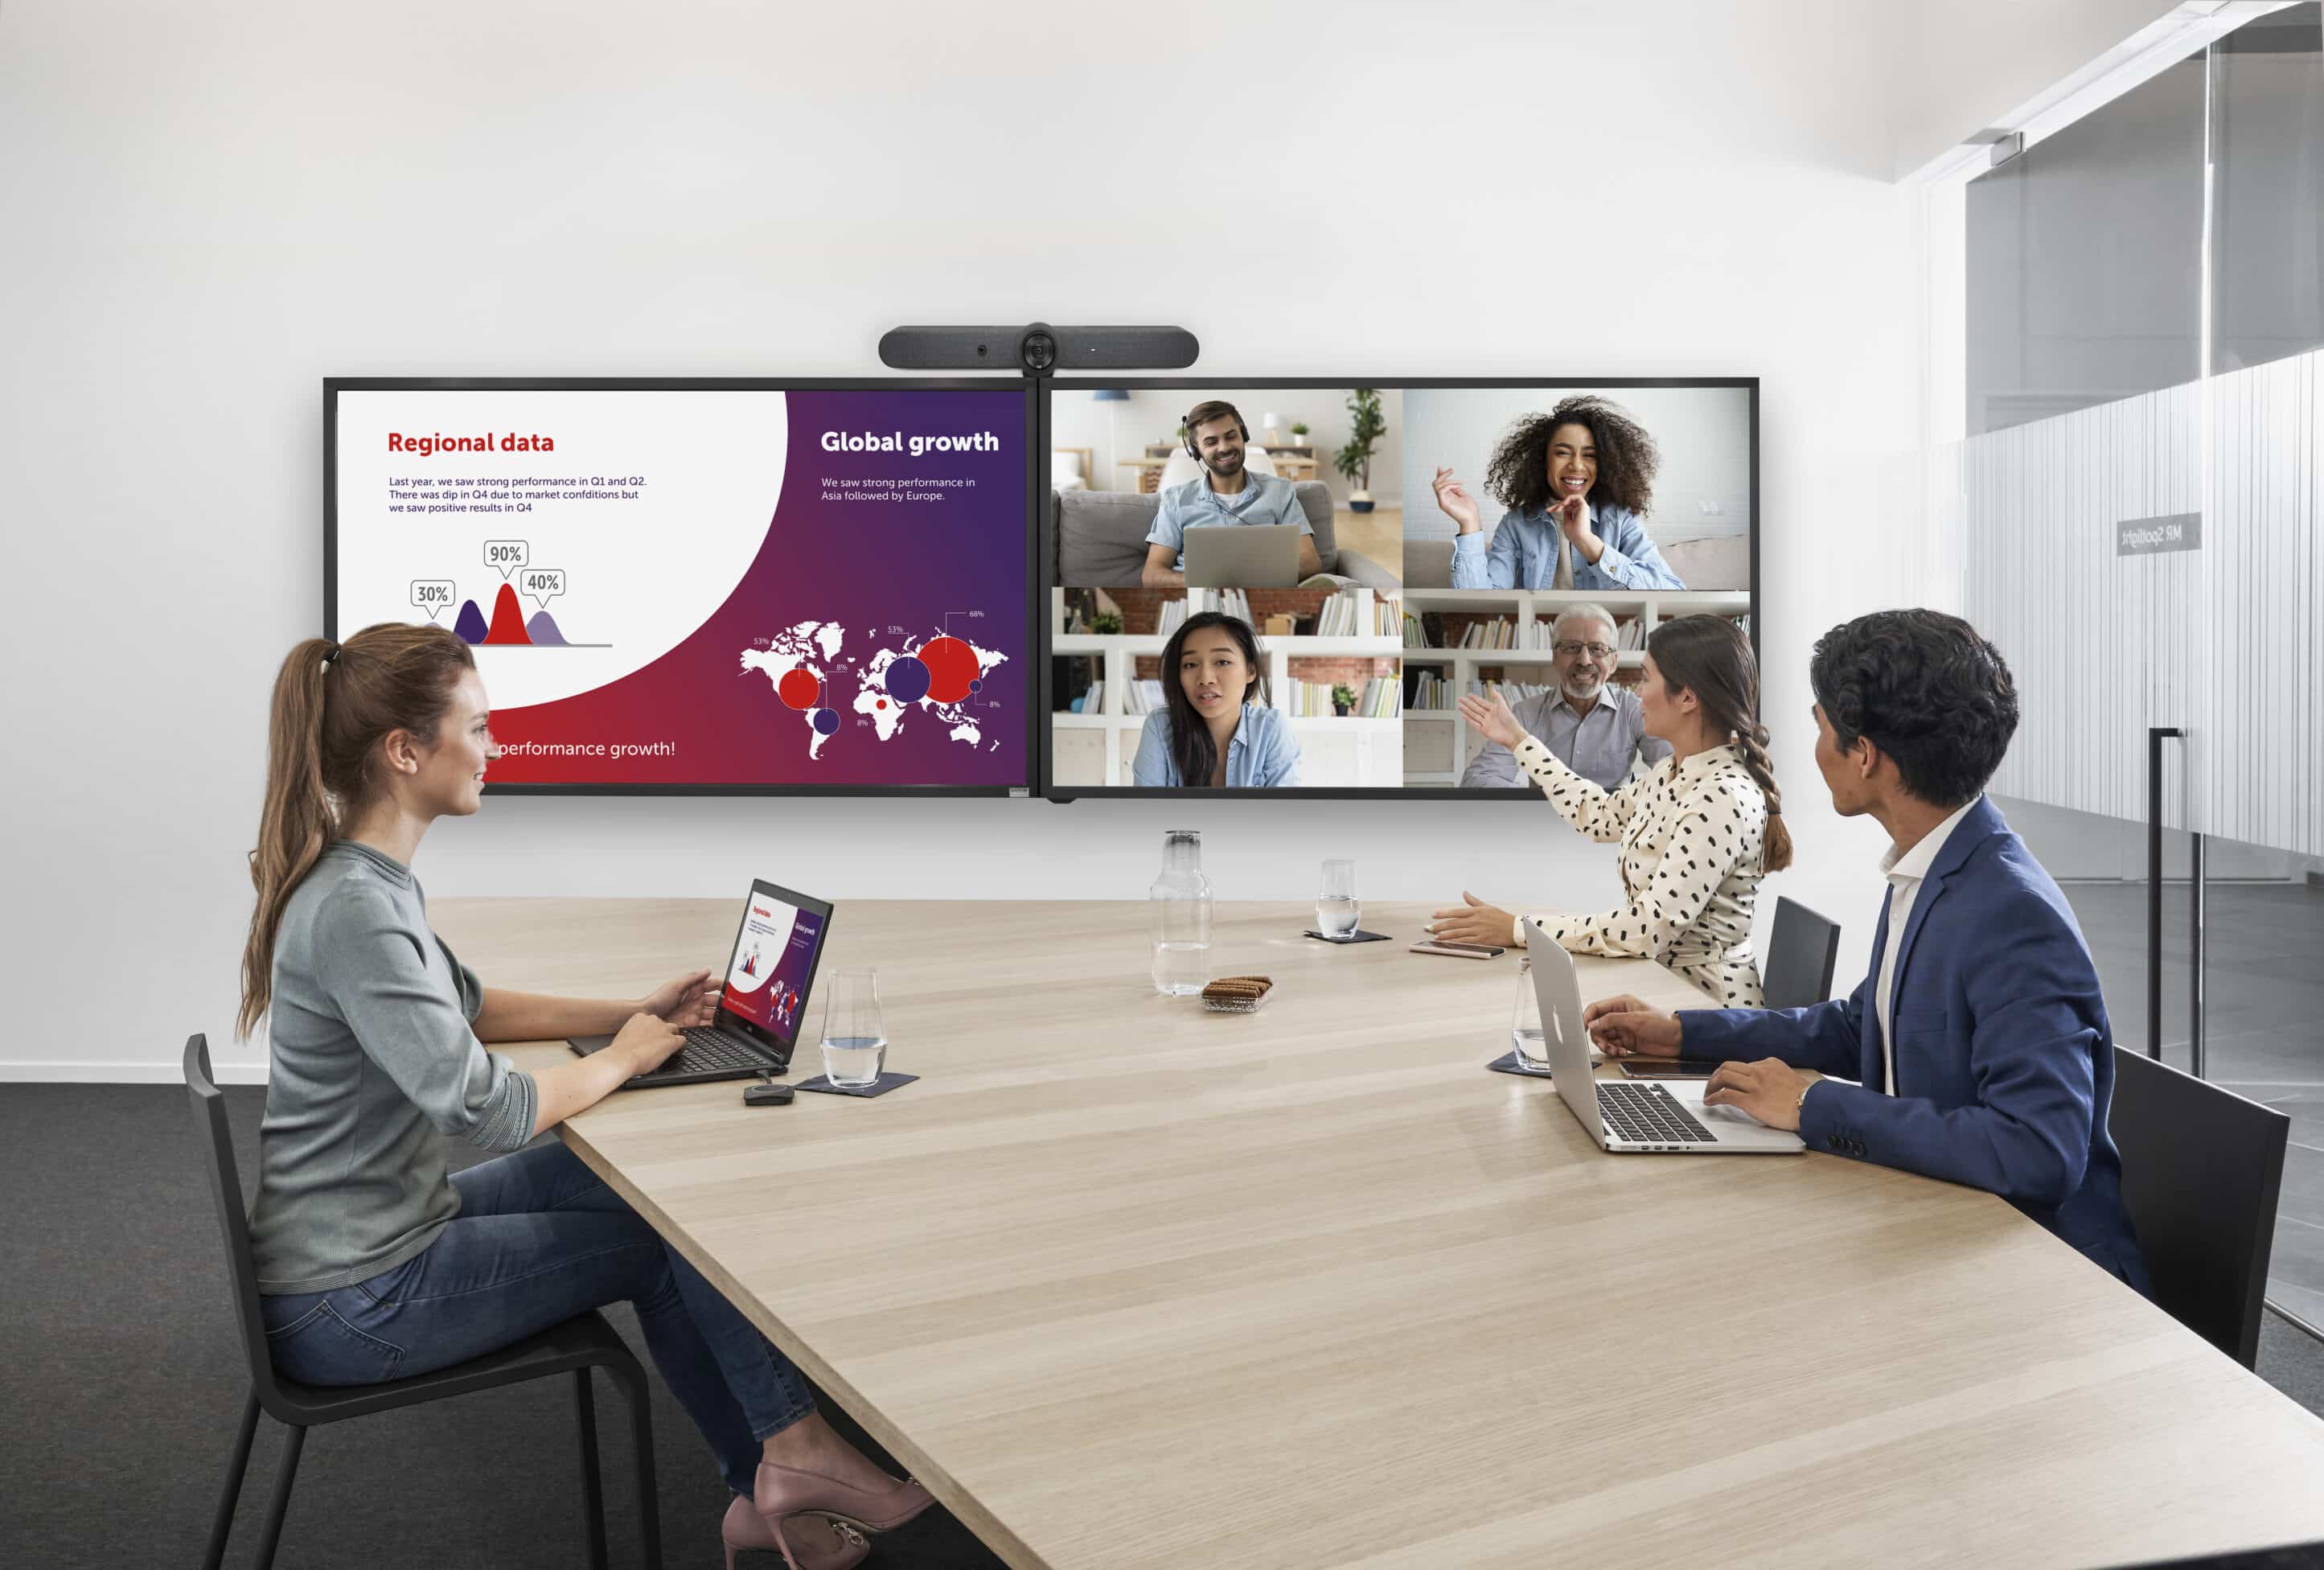 Hybrid workplace webcast meeting in conference room with Barco cCickshare conference in use.